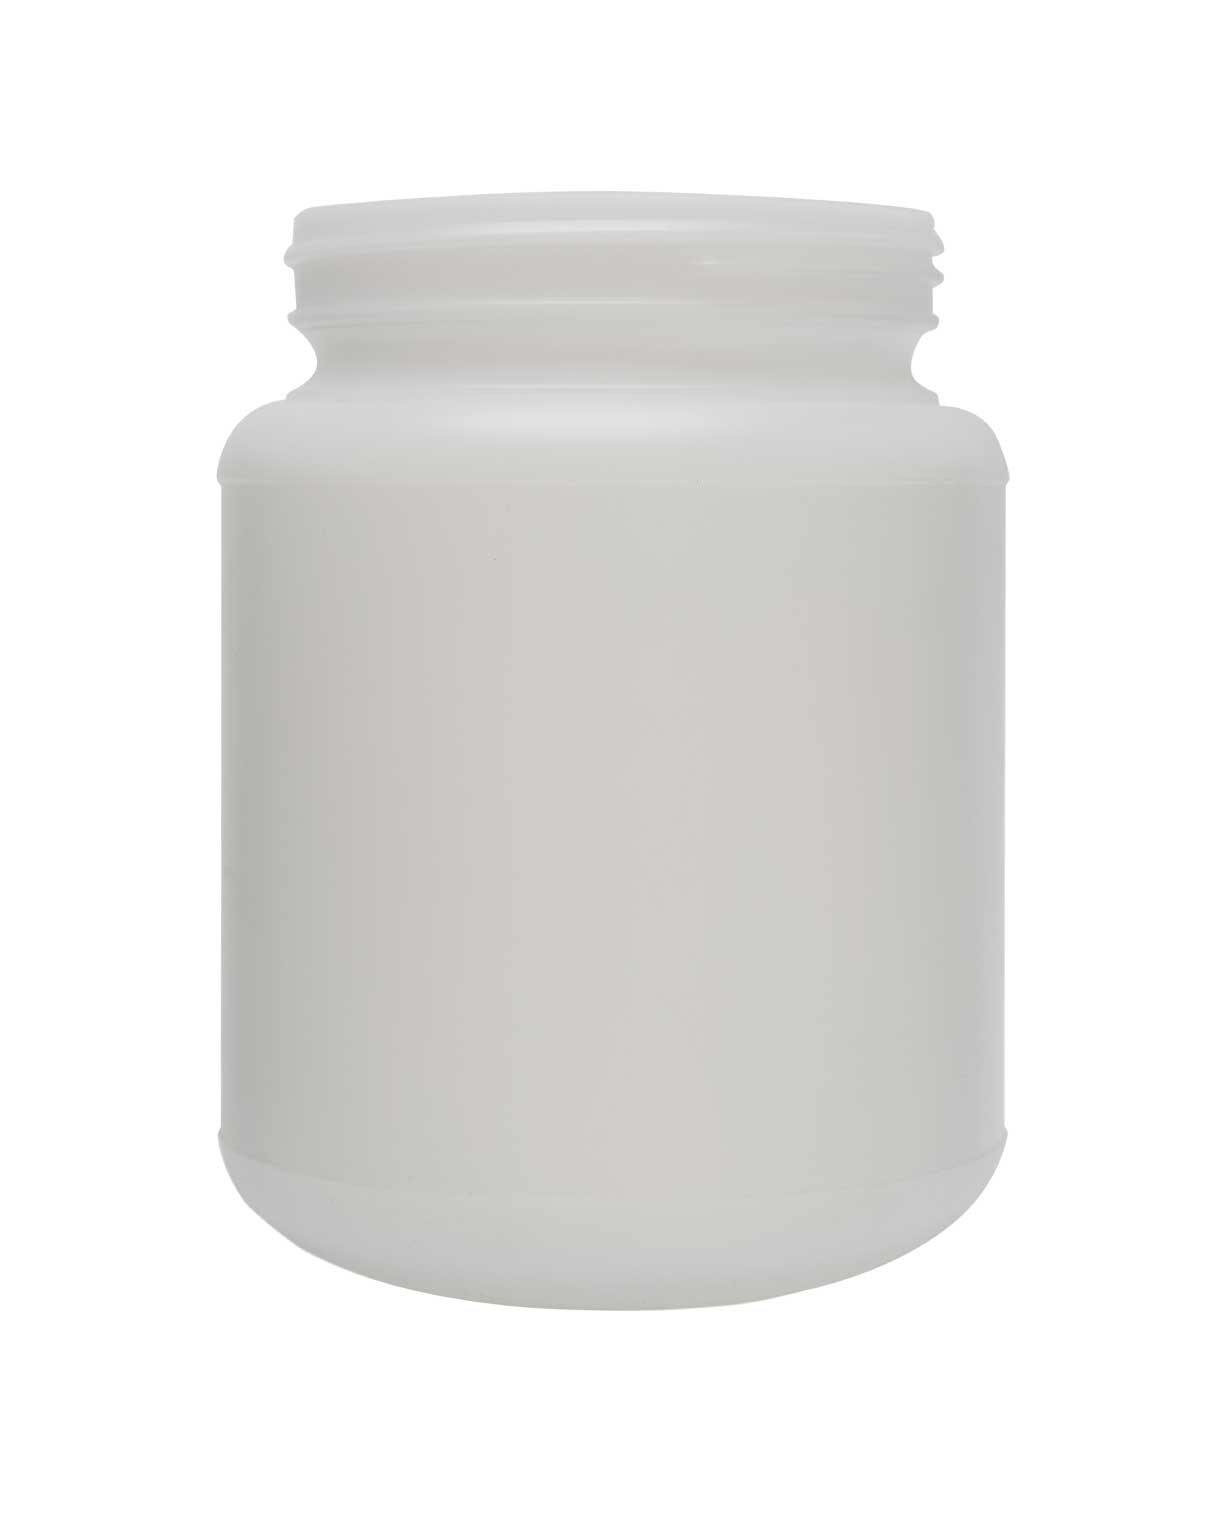 1 Gallon Natural HDPE Wide Mouth Round Plastic Jar - 110-400 Neck